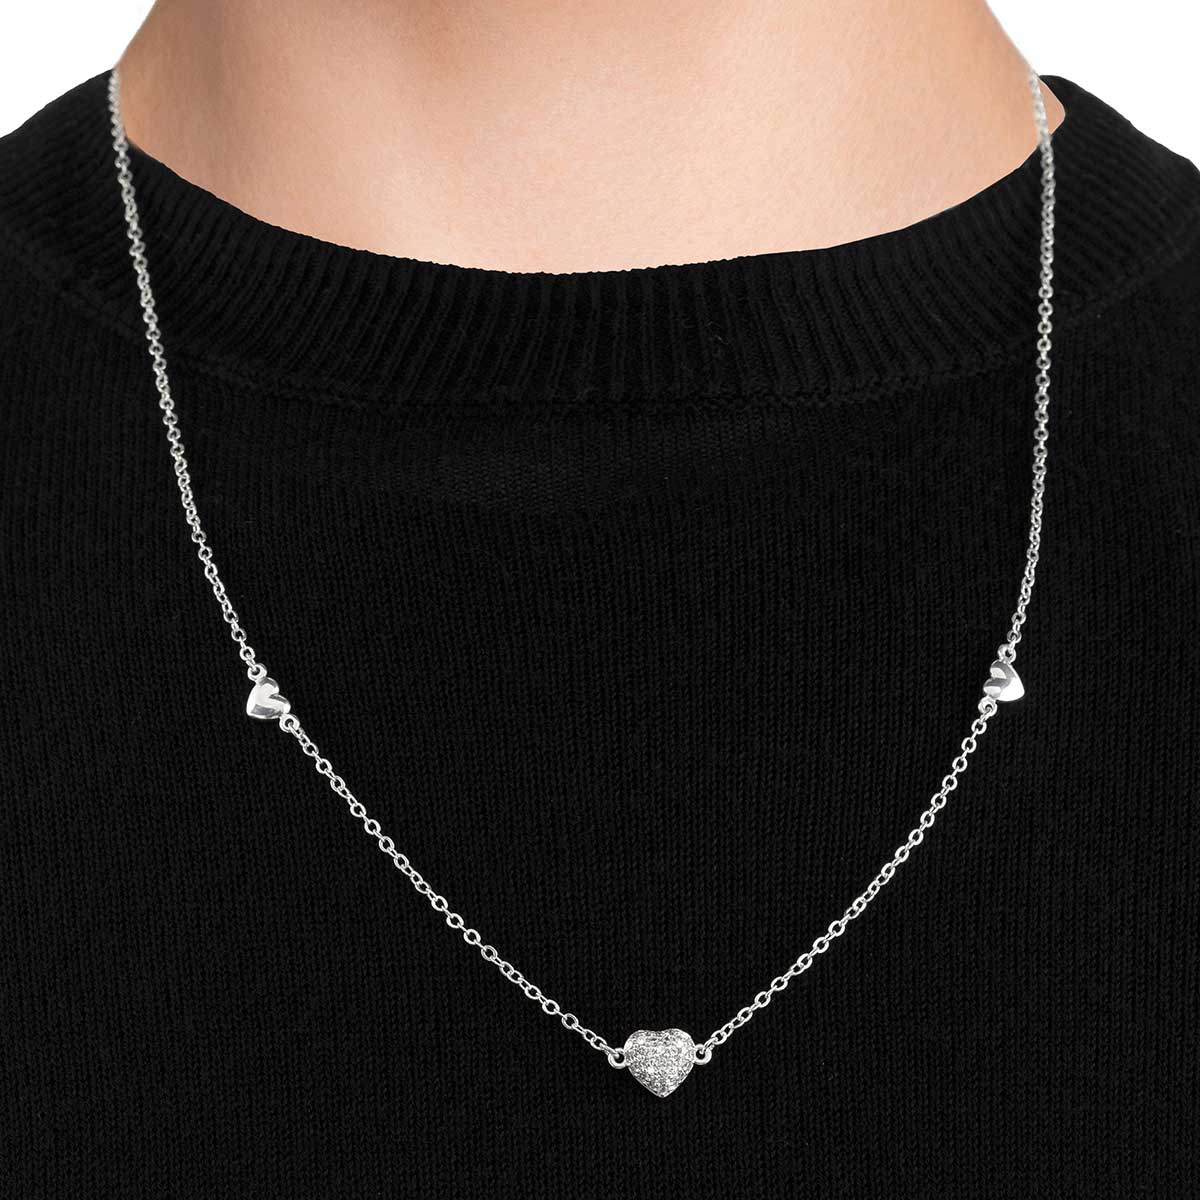 NECKLACE HEART SILVER